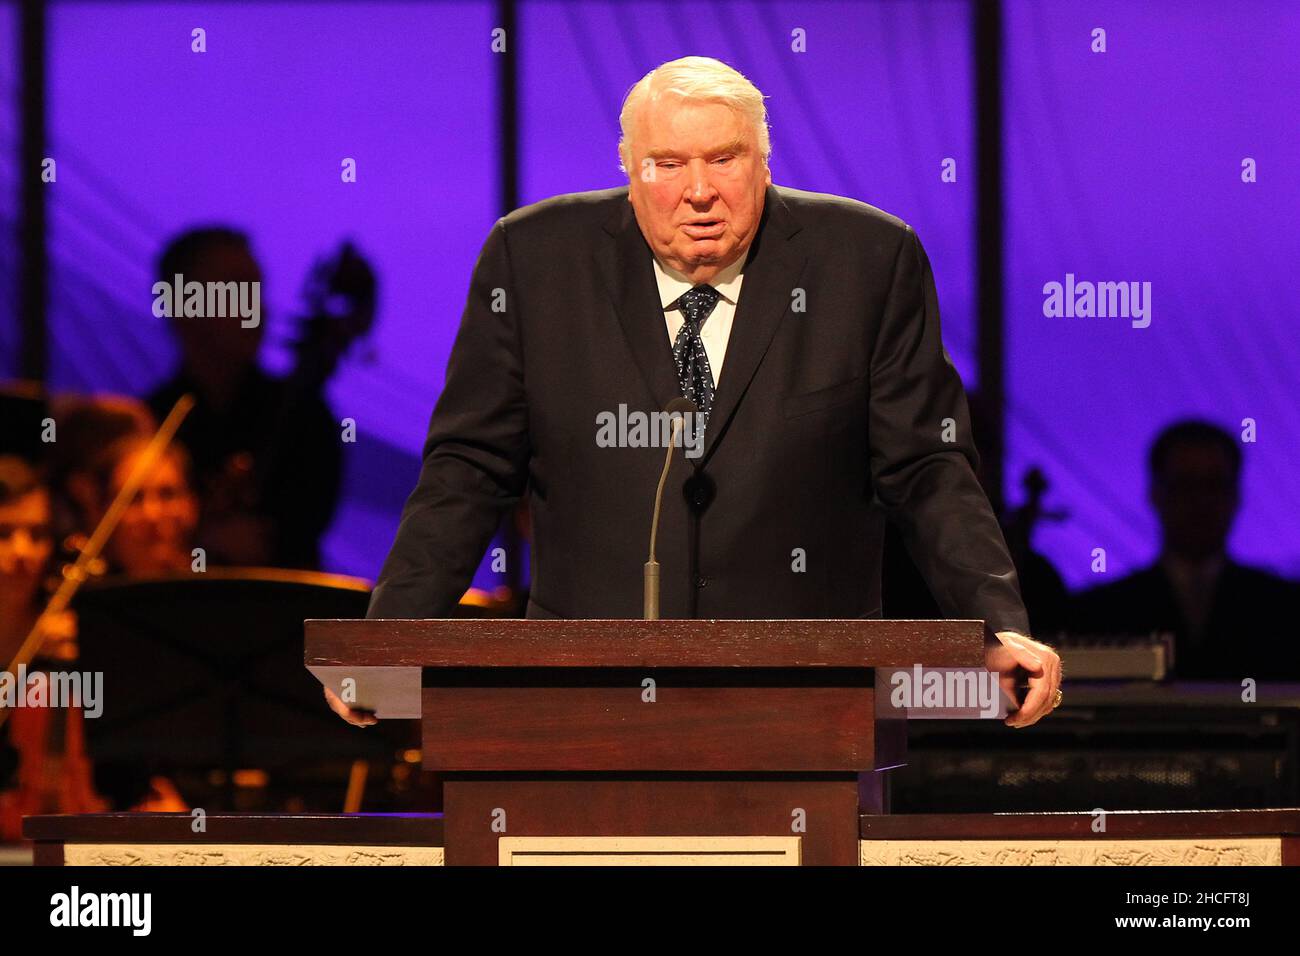 Plano, TX, USA. 20th Apr, 2021. John Madden at the funeral service for sportscaster, Pat Summerall at the Worship Center at Prestonwood Baptist Church in Plano, Texas. April 20, 2013. Credit: Mpi34/Media Punch Inc./Alamy Live News Stock Photo